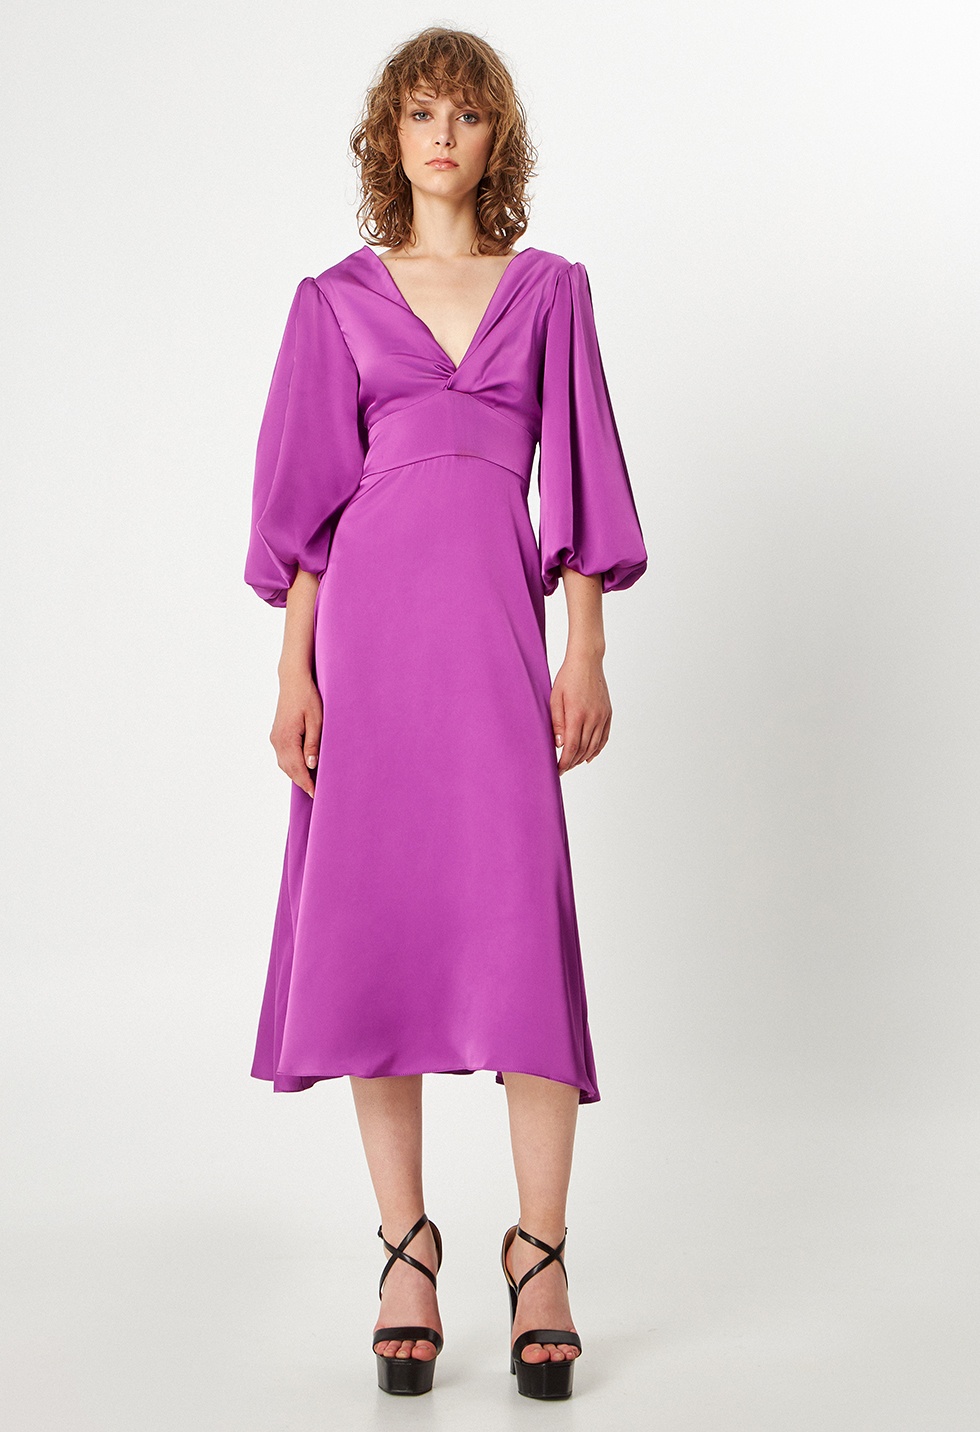 Satin dress with puff sleeves